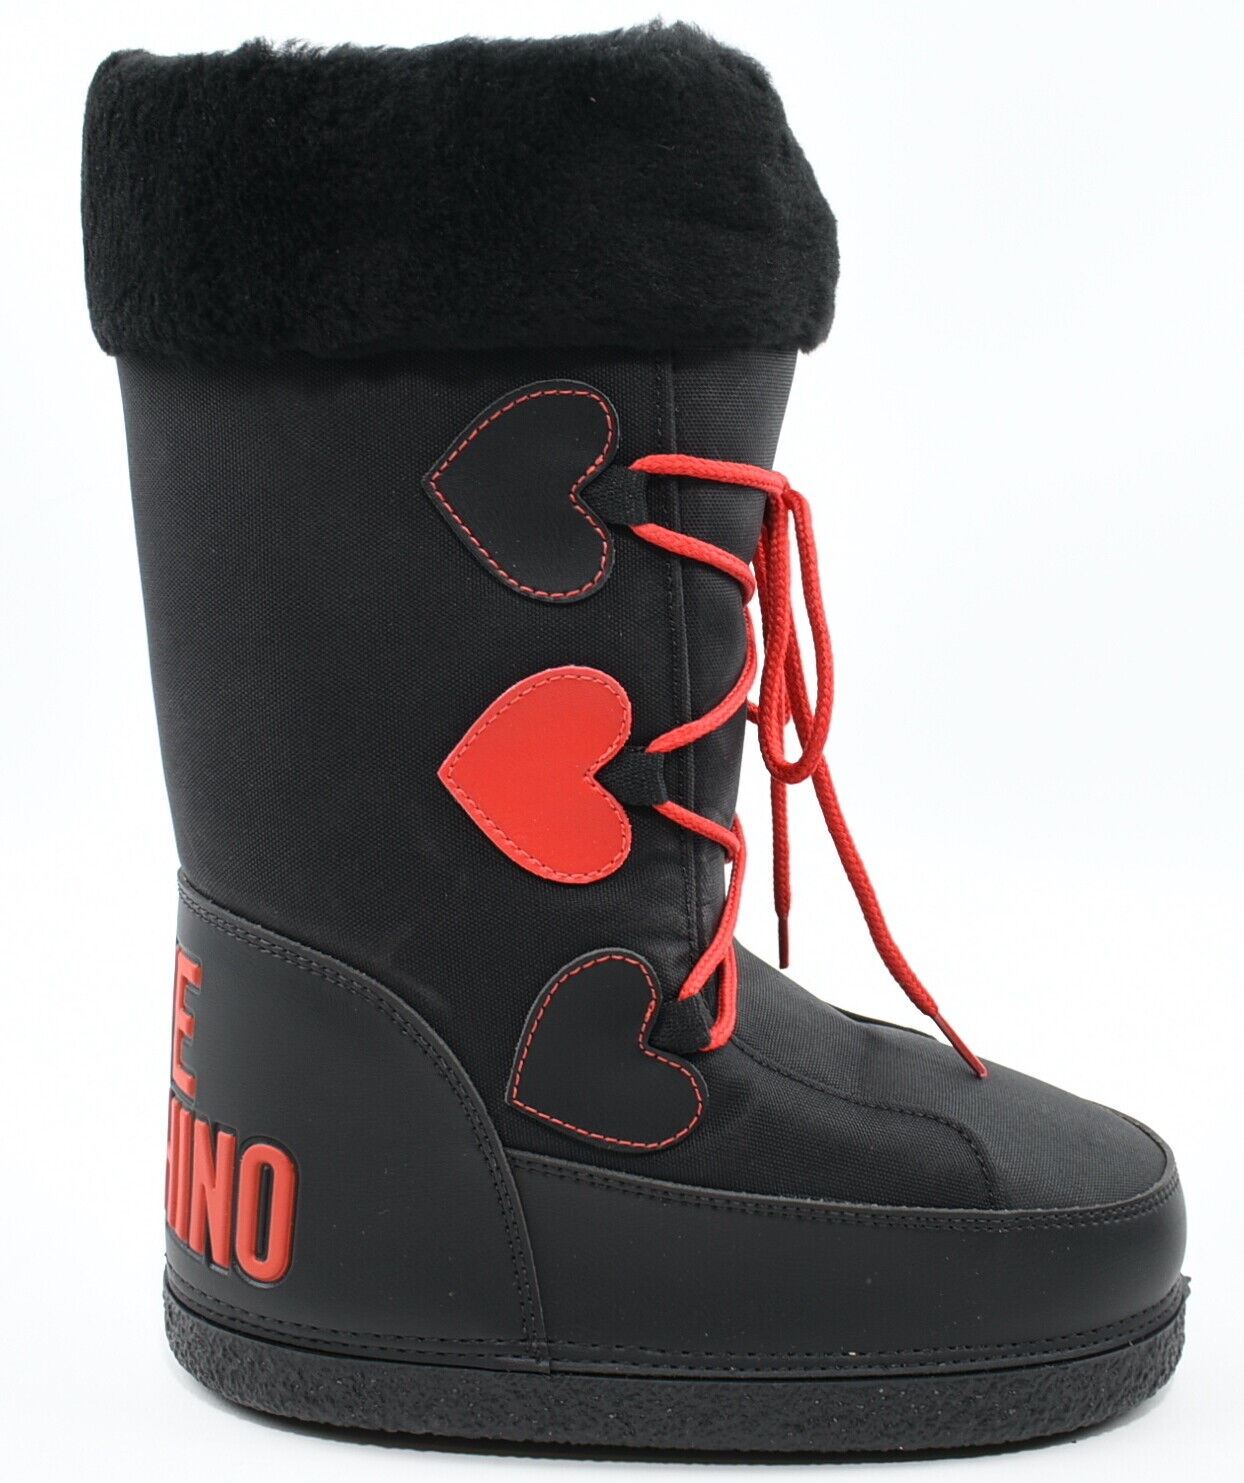 LOVE MOSCHINO - Women's Winter Snow Boots, Black/Red, size UK 3